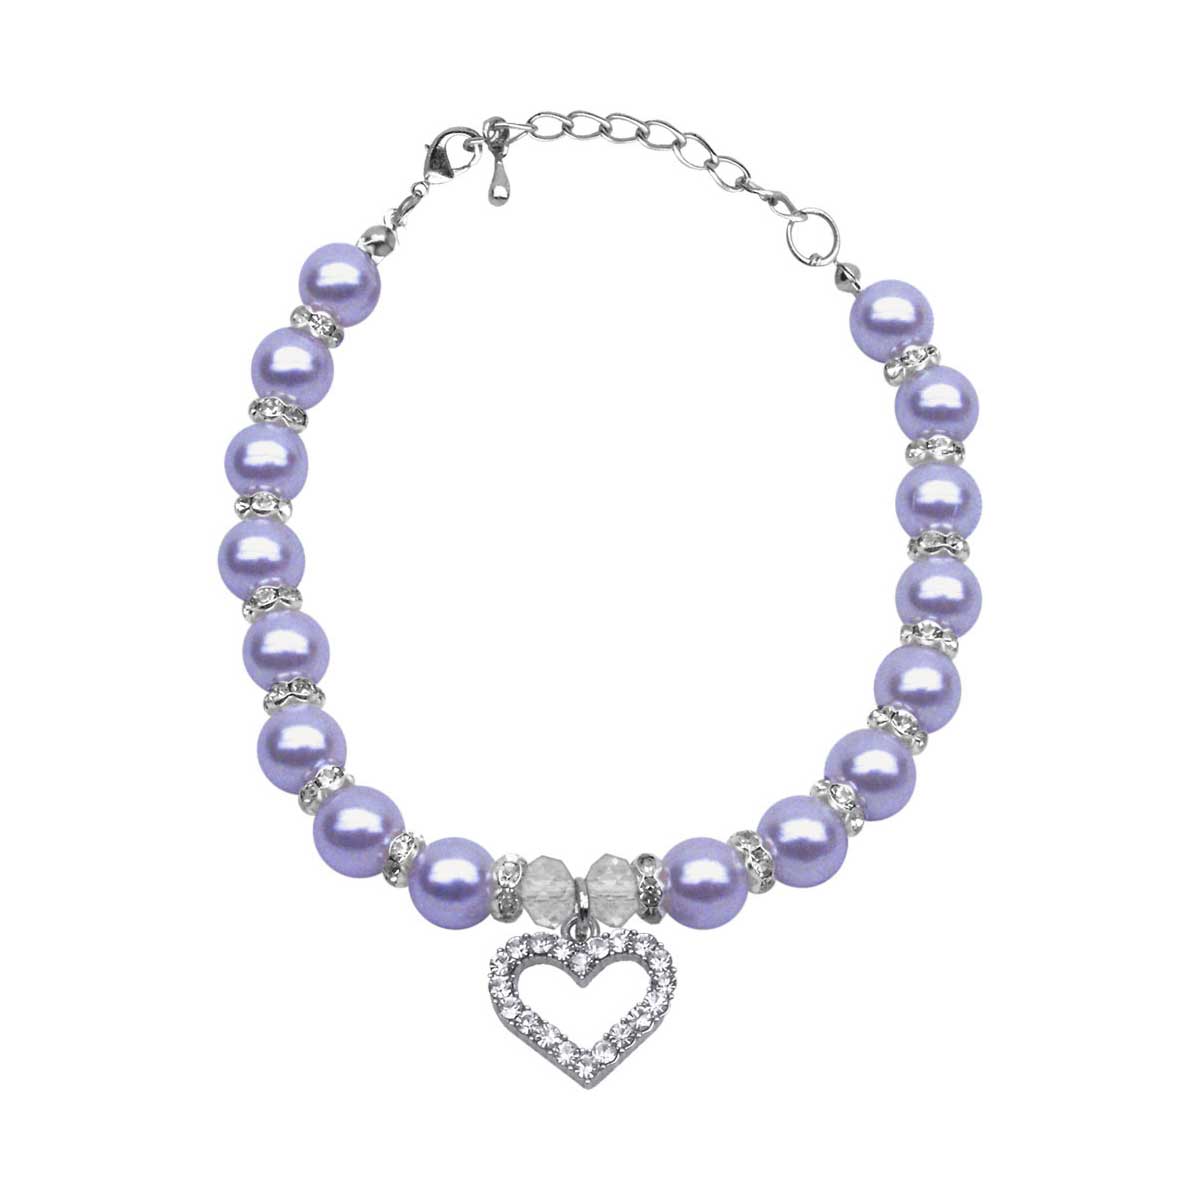 Crystal Heart Necklace with Lavender Pearls | Pawlicious & Company